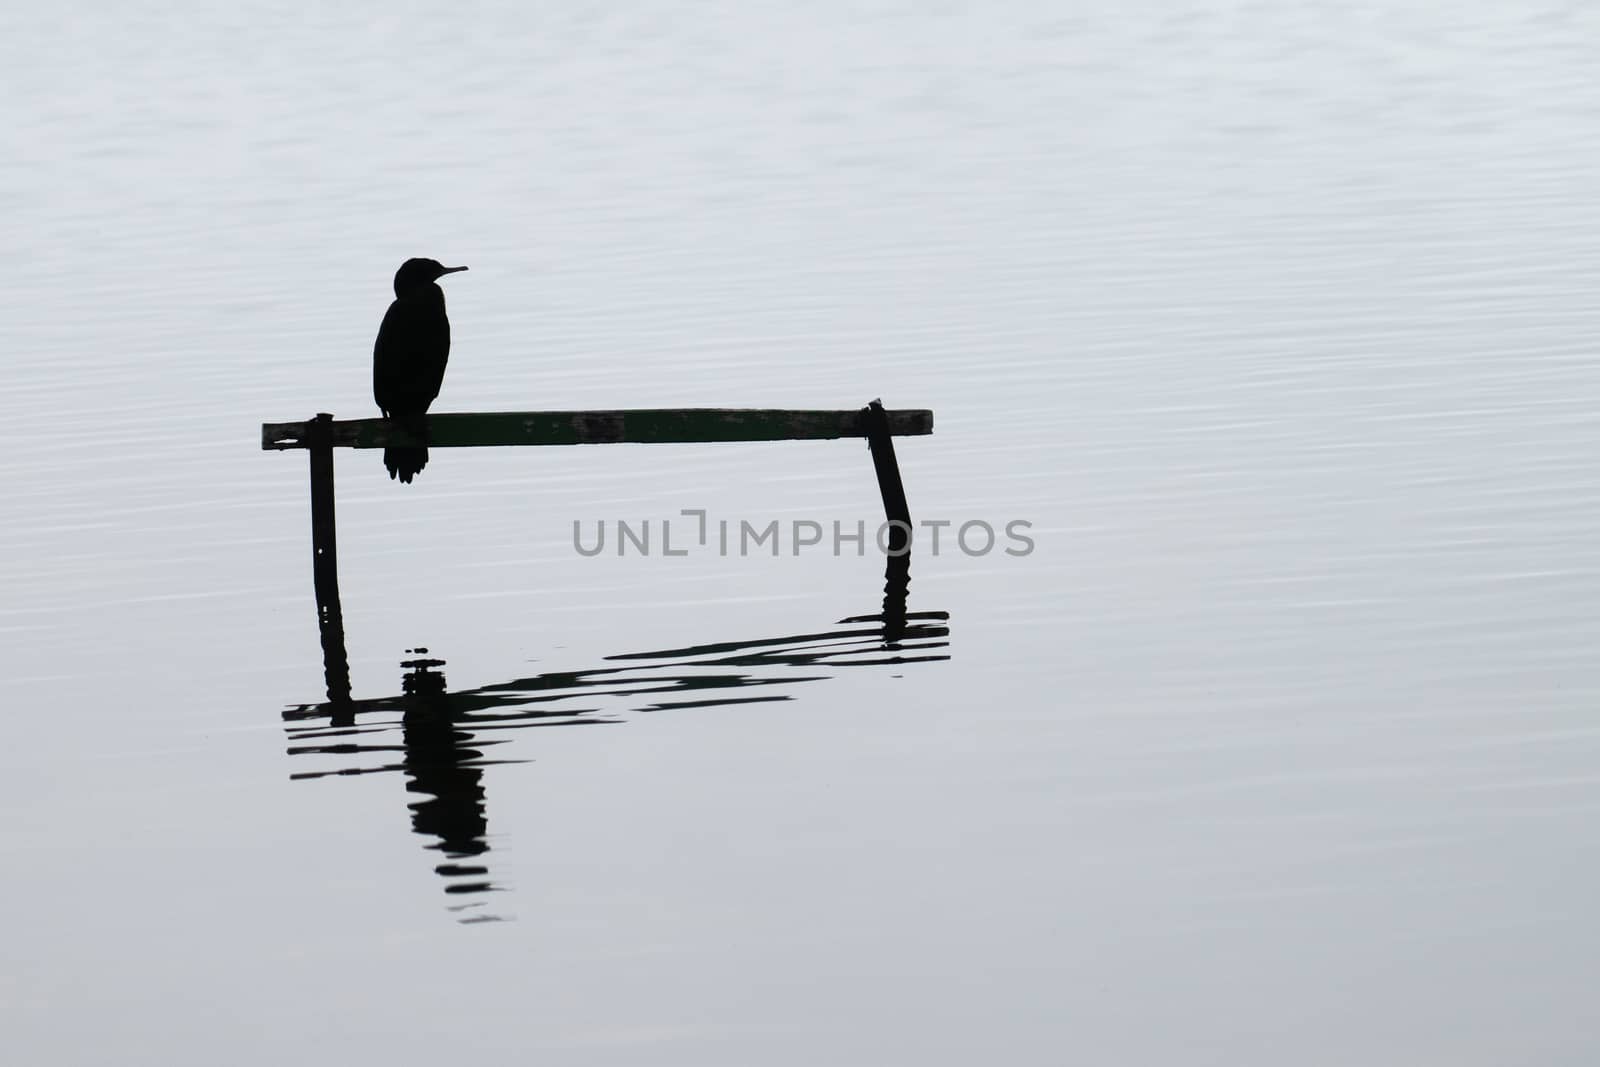 Little shag through the mist perching over and reflected in calm water below.